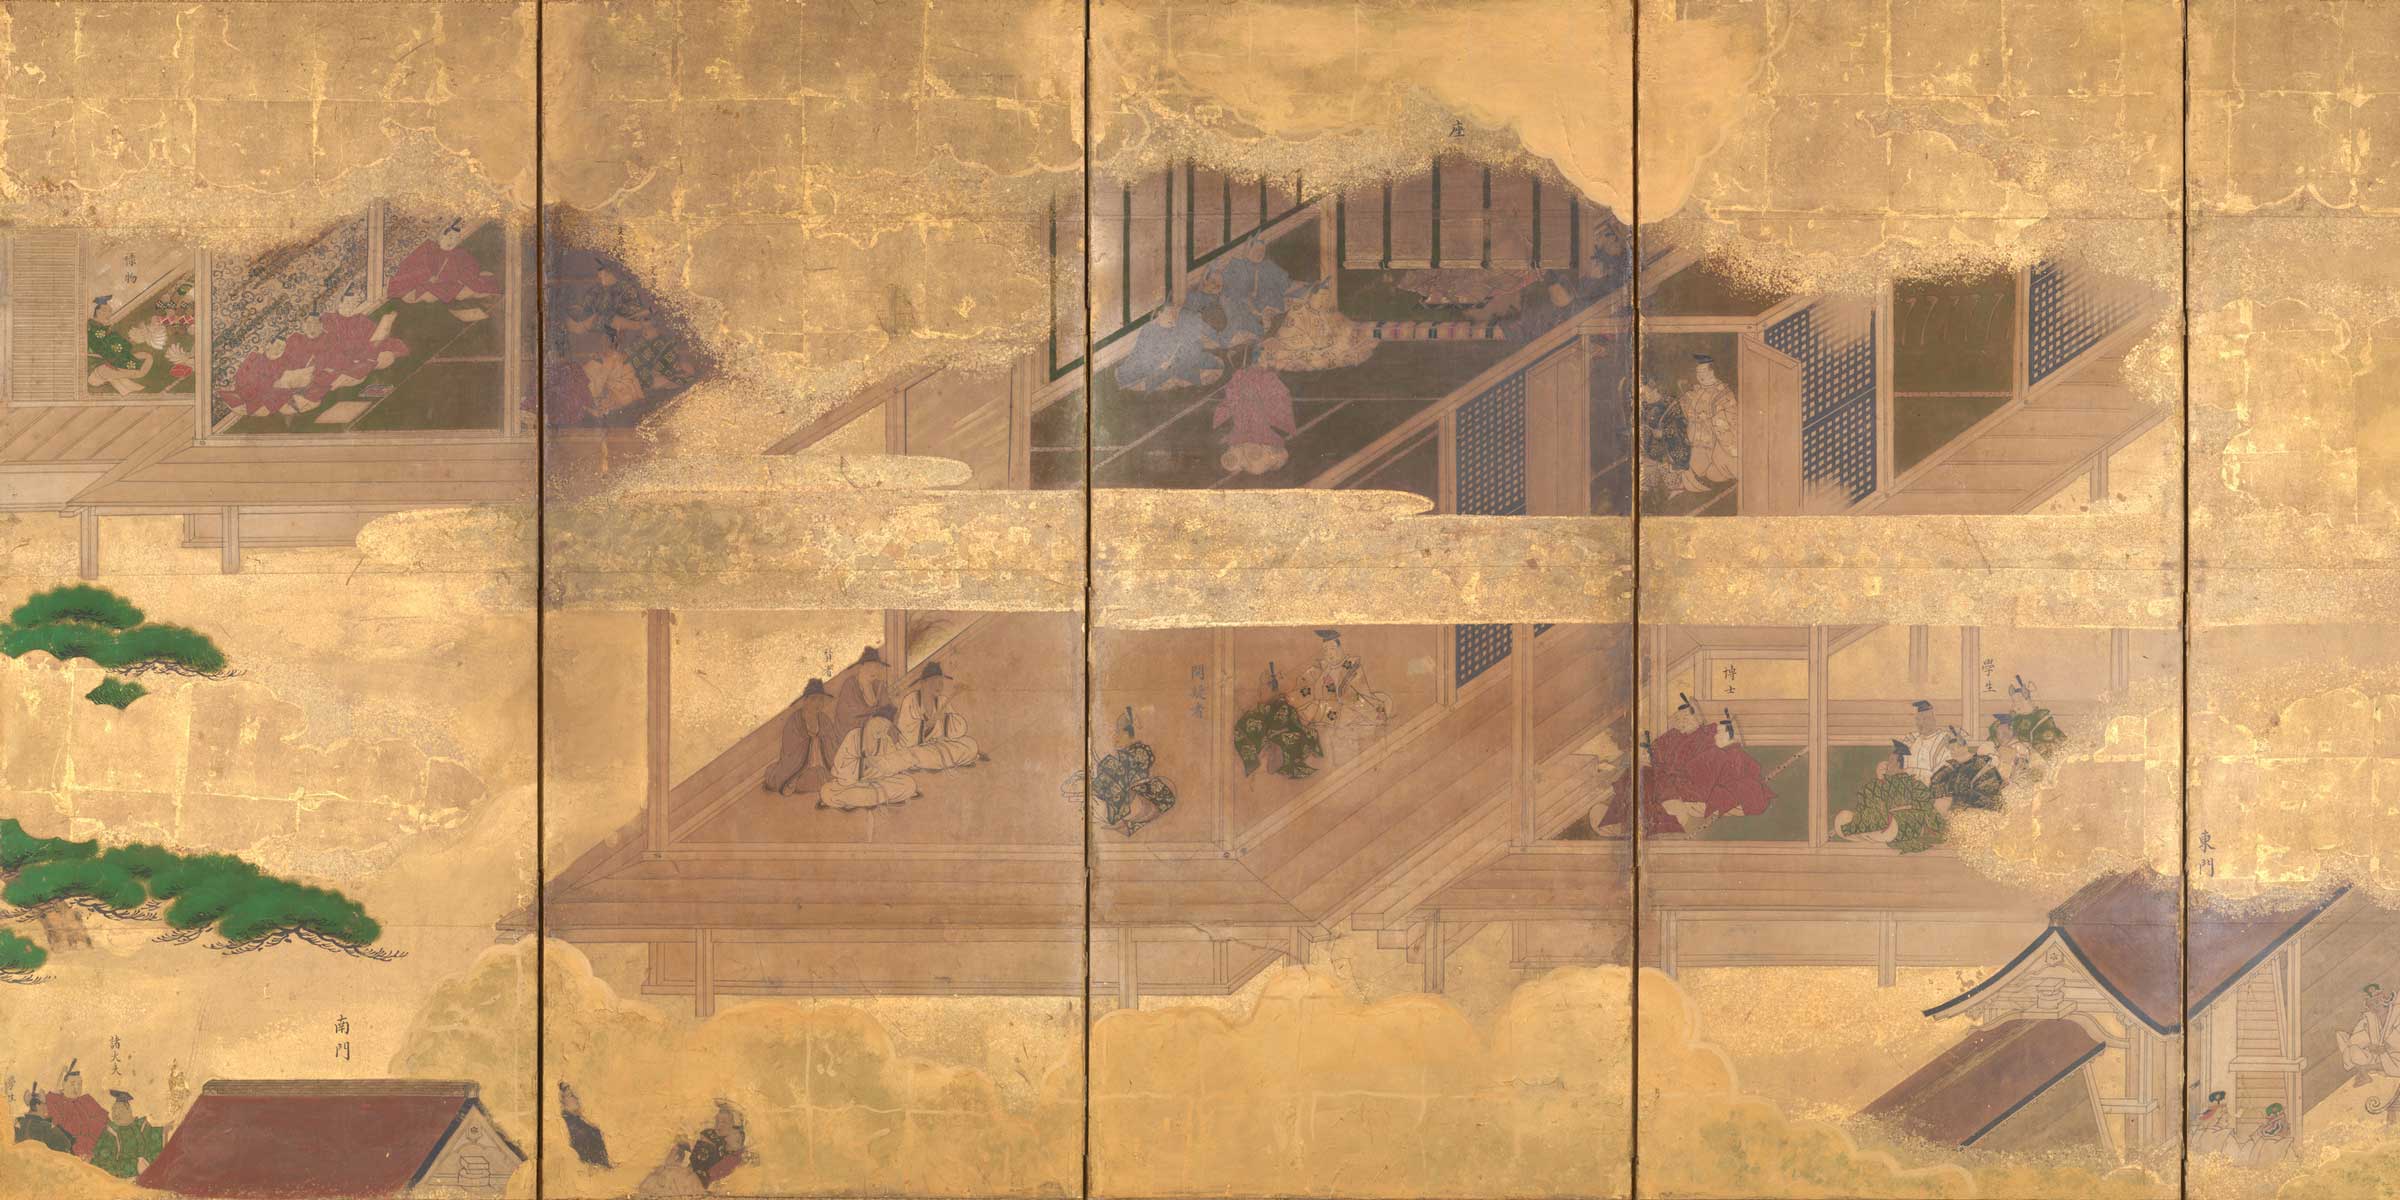 Scenes at the University with Images of the Ancient Sages (detail), Japan, seventeenth century.